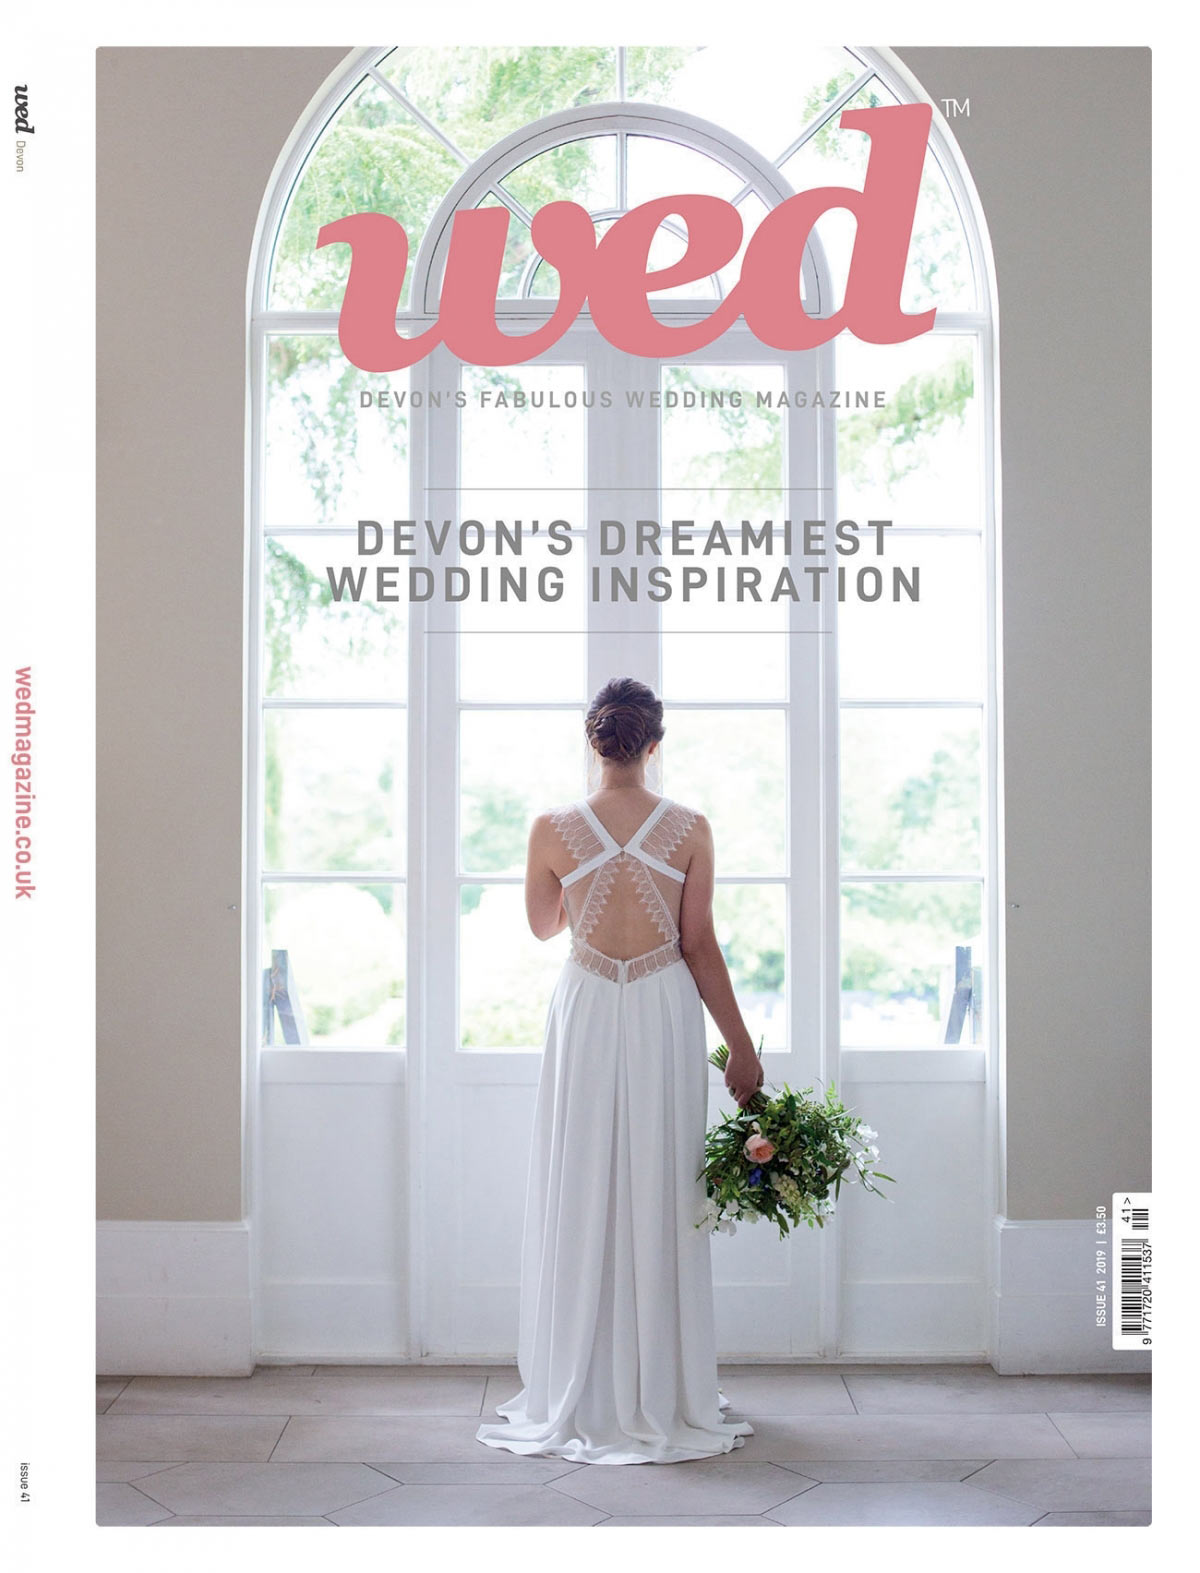 New Wed Devon issue 41 out now!